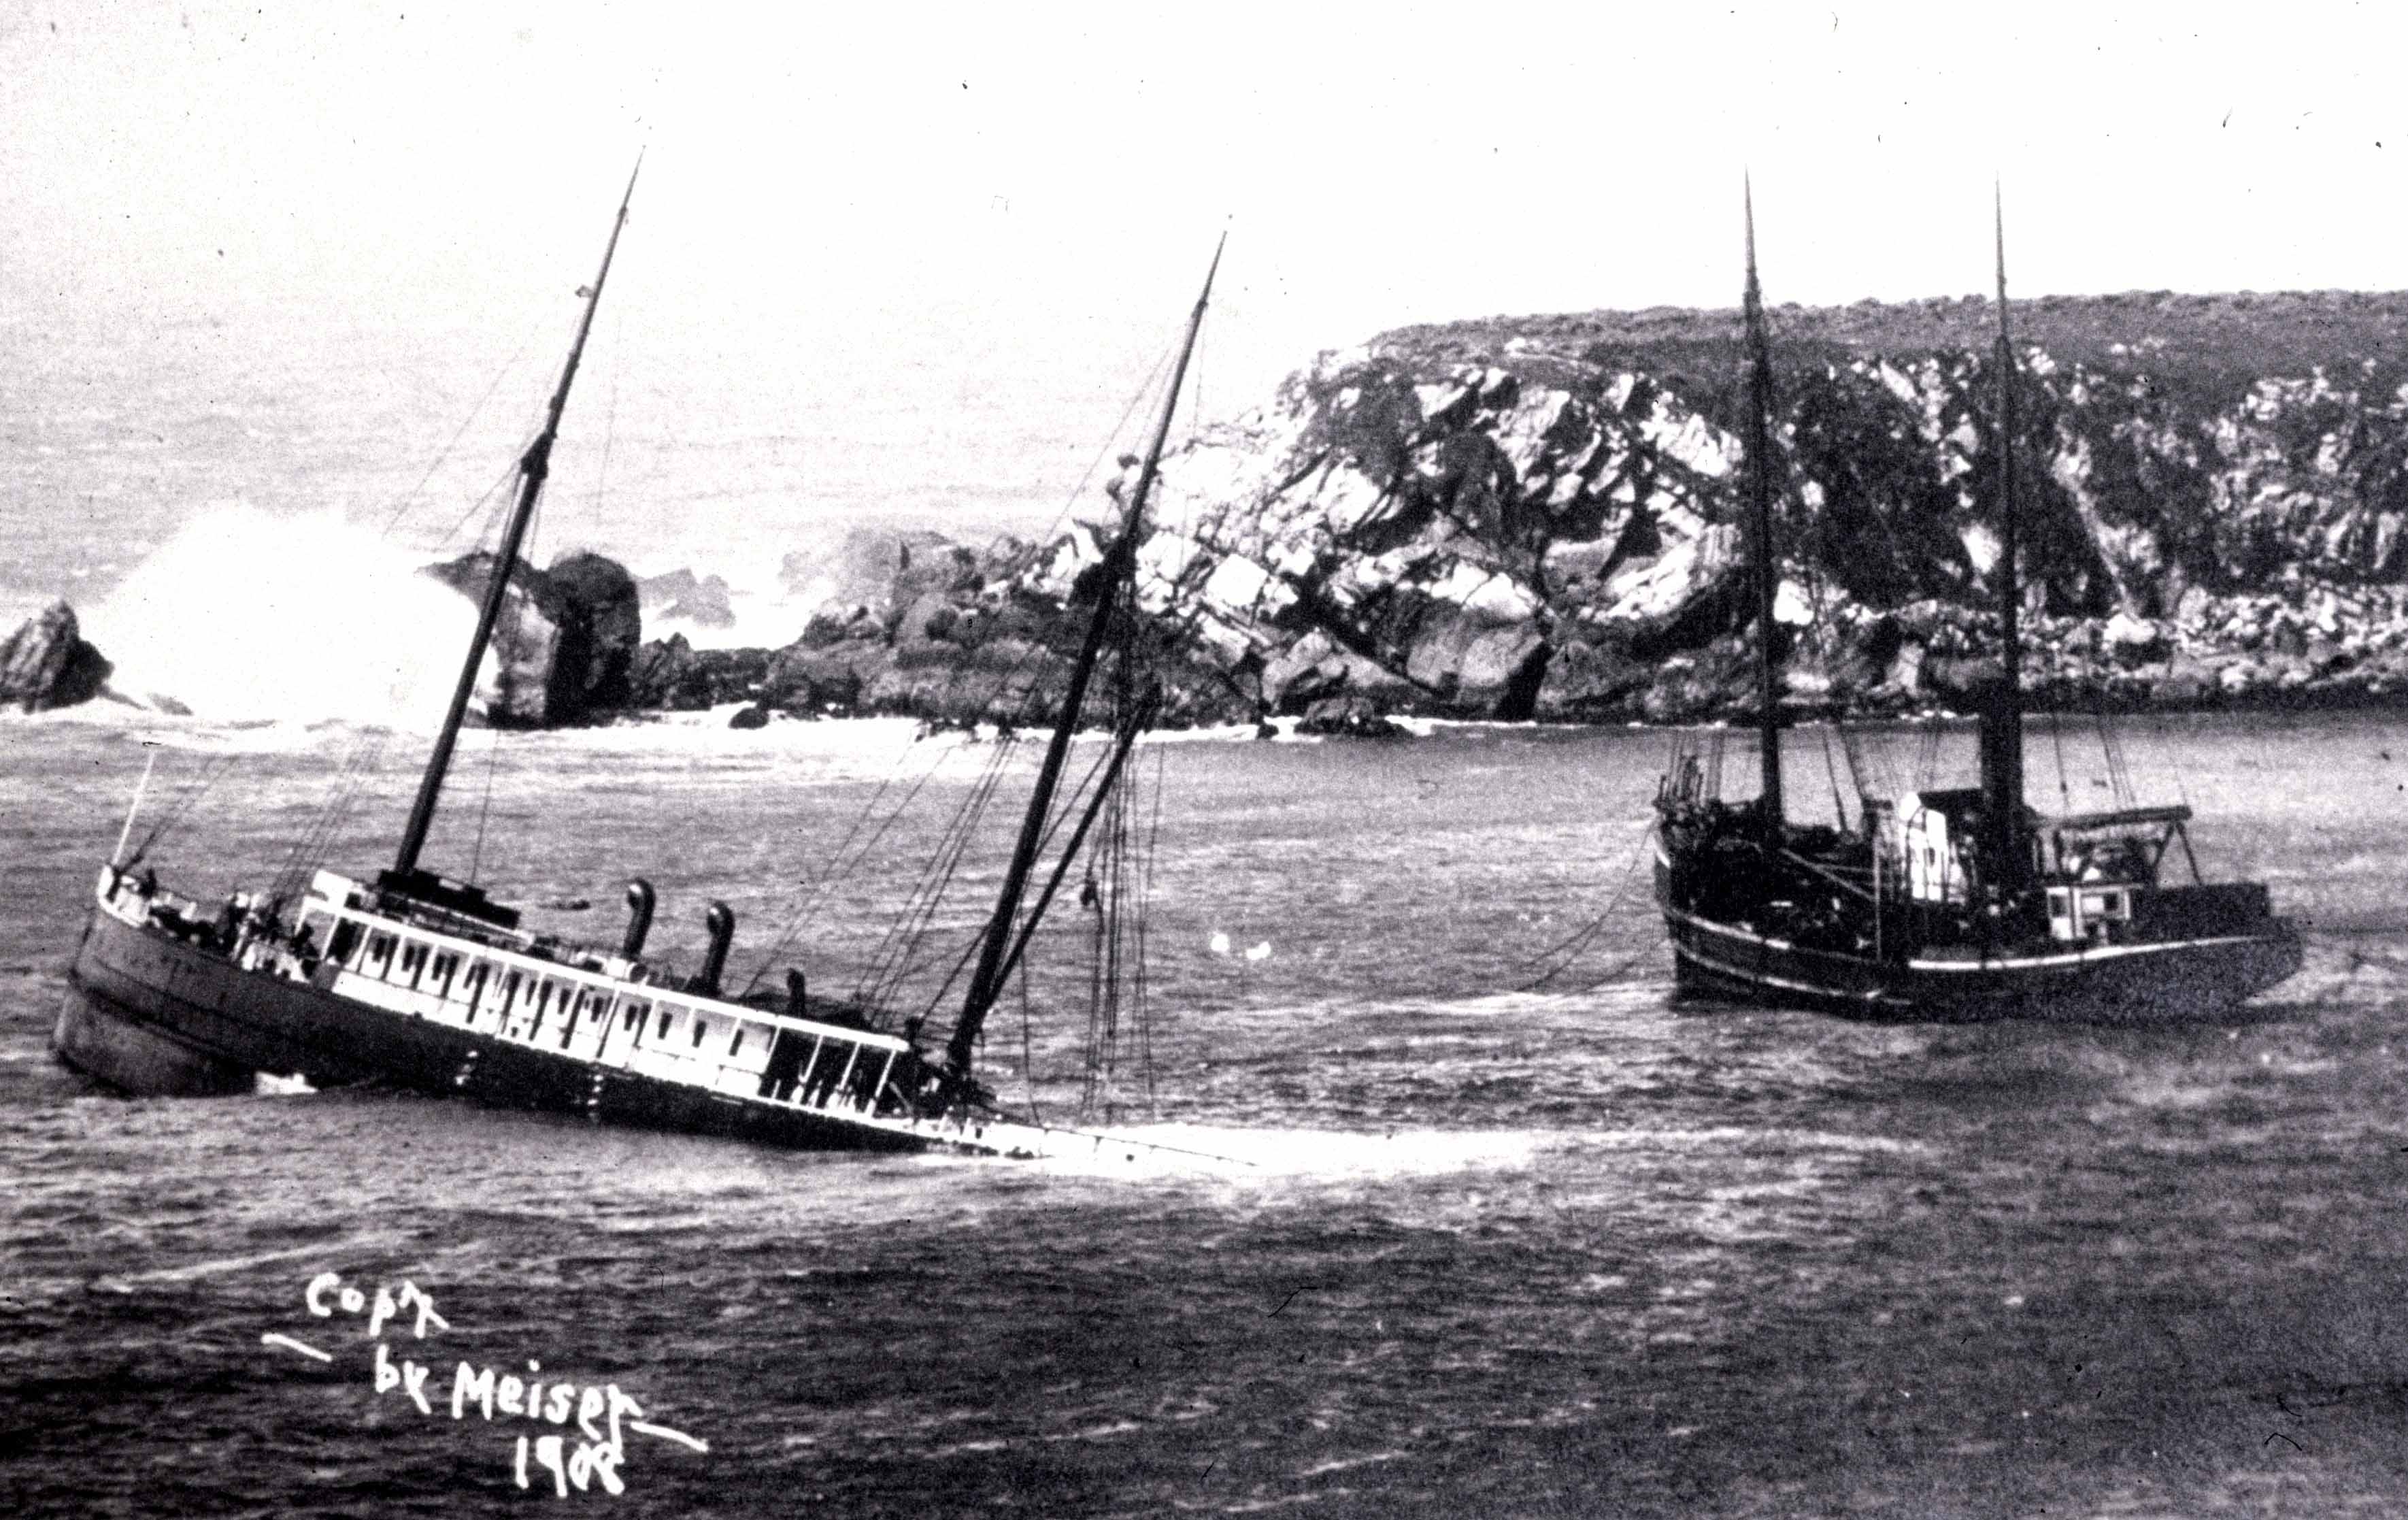 Historic photo of the SS Pomona wreck and the salvage vessel the Greenwood taken in 1908